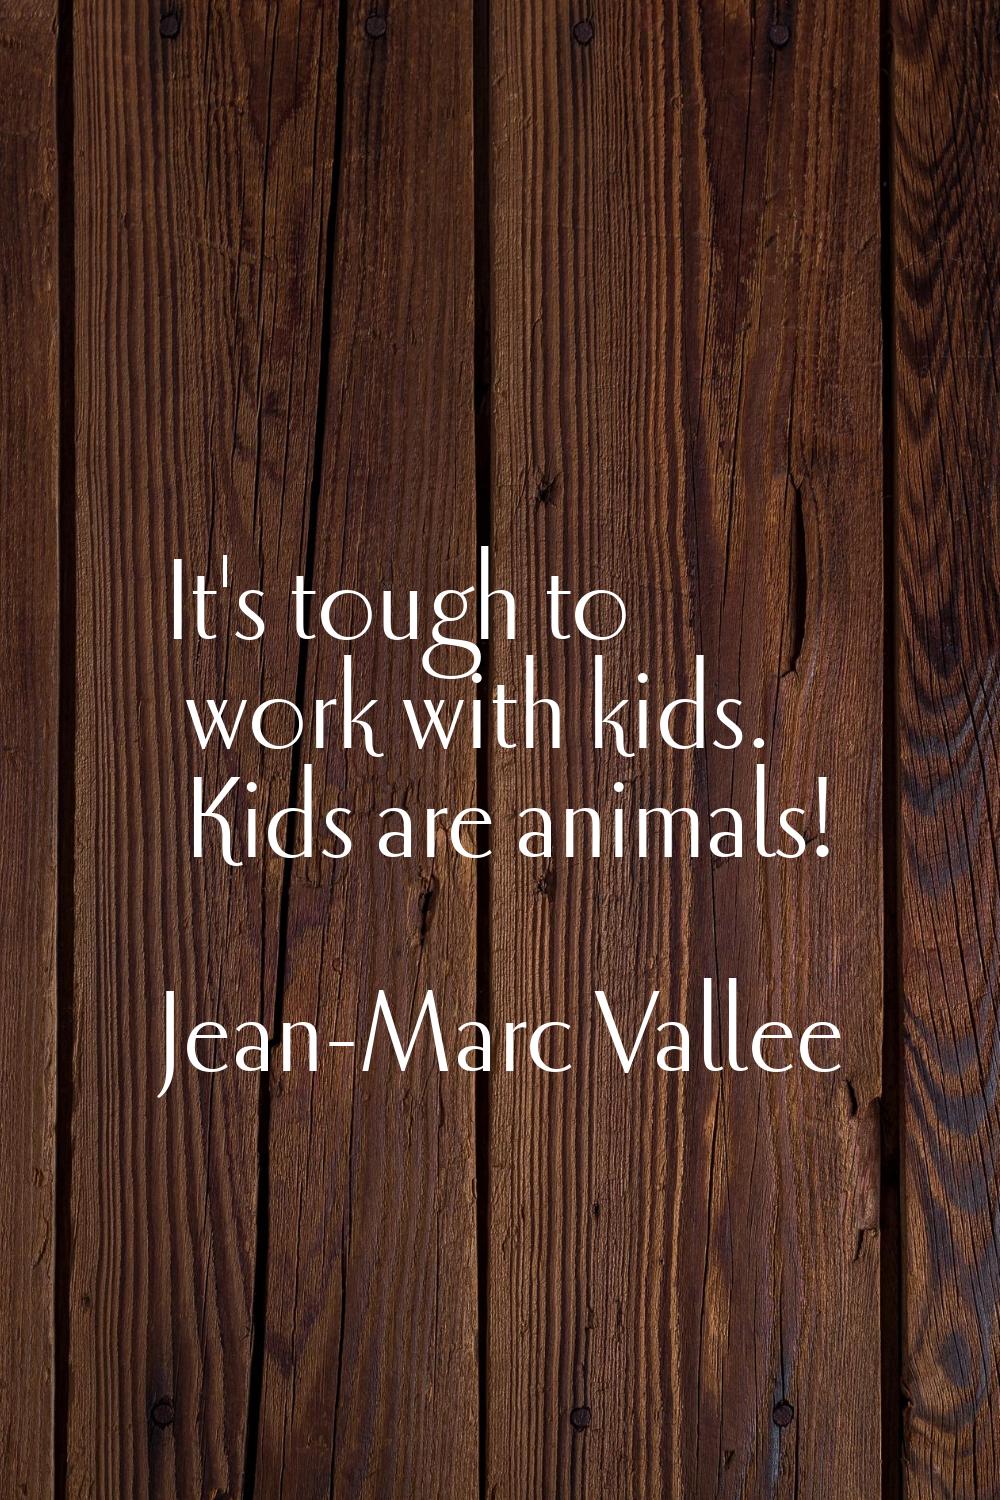 It's tough to work with kids. Kids are animals!